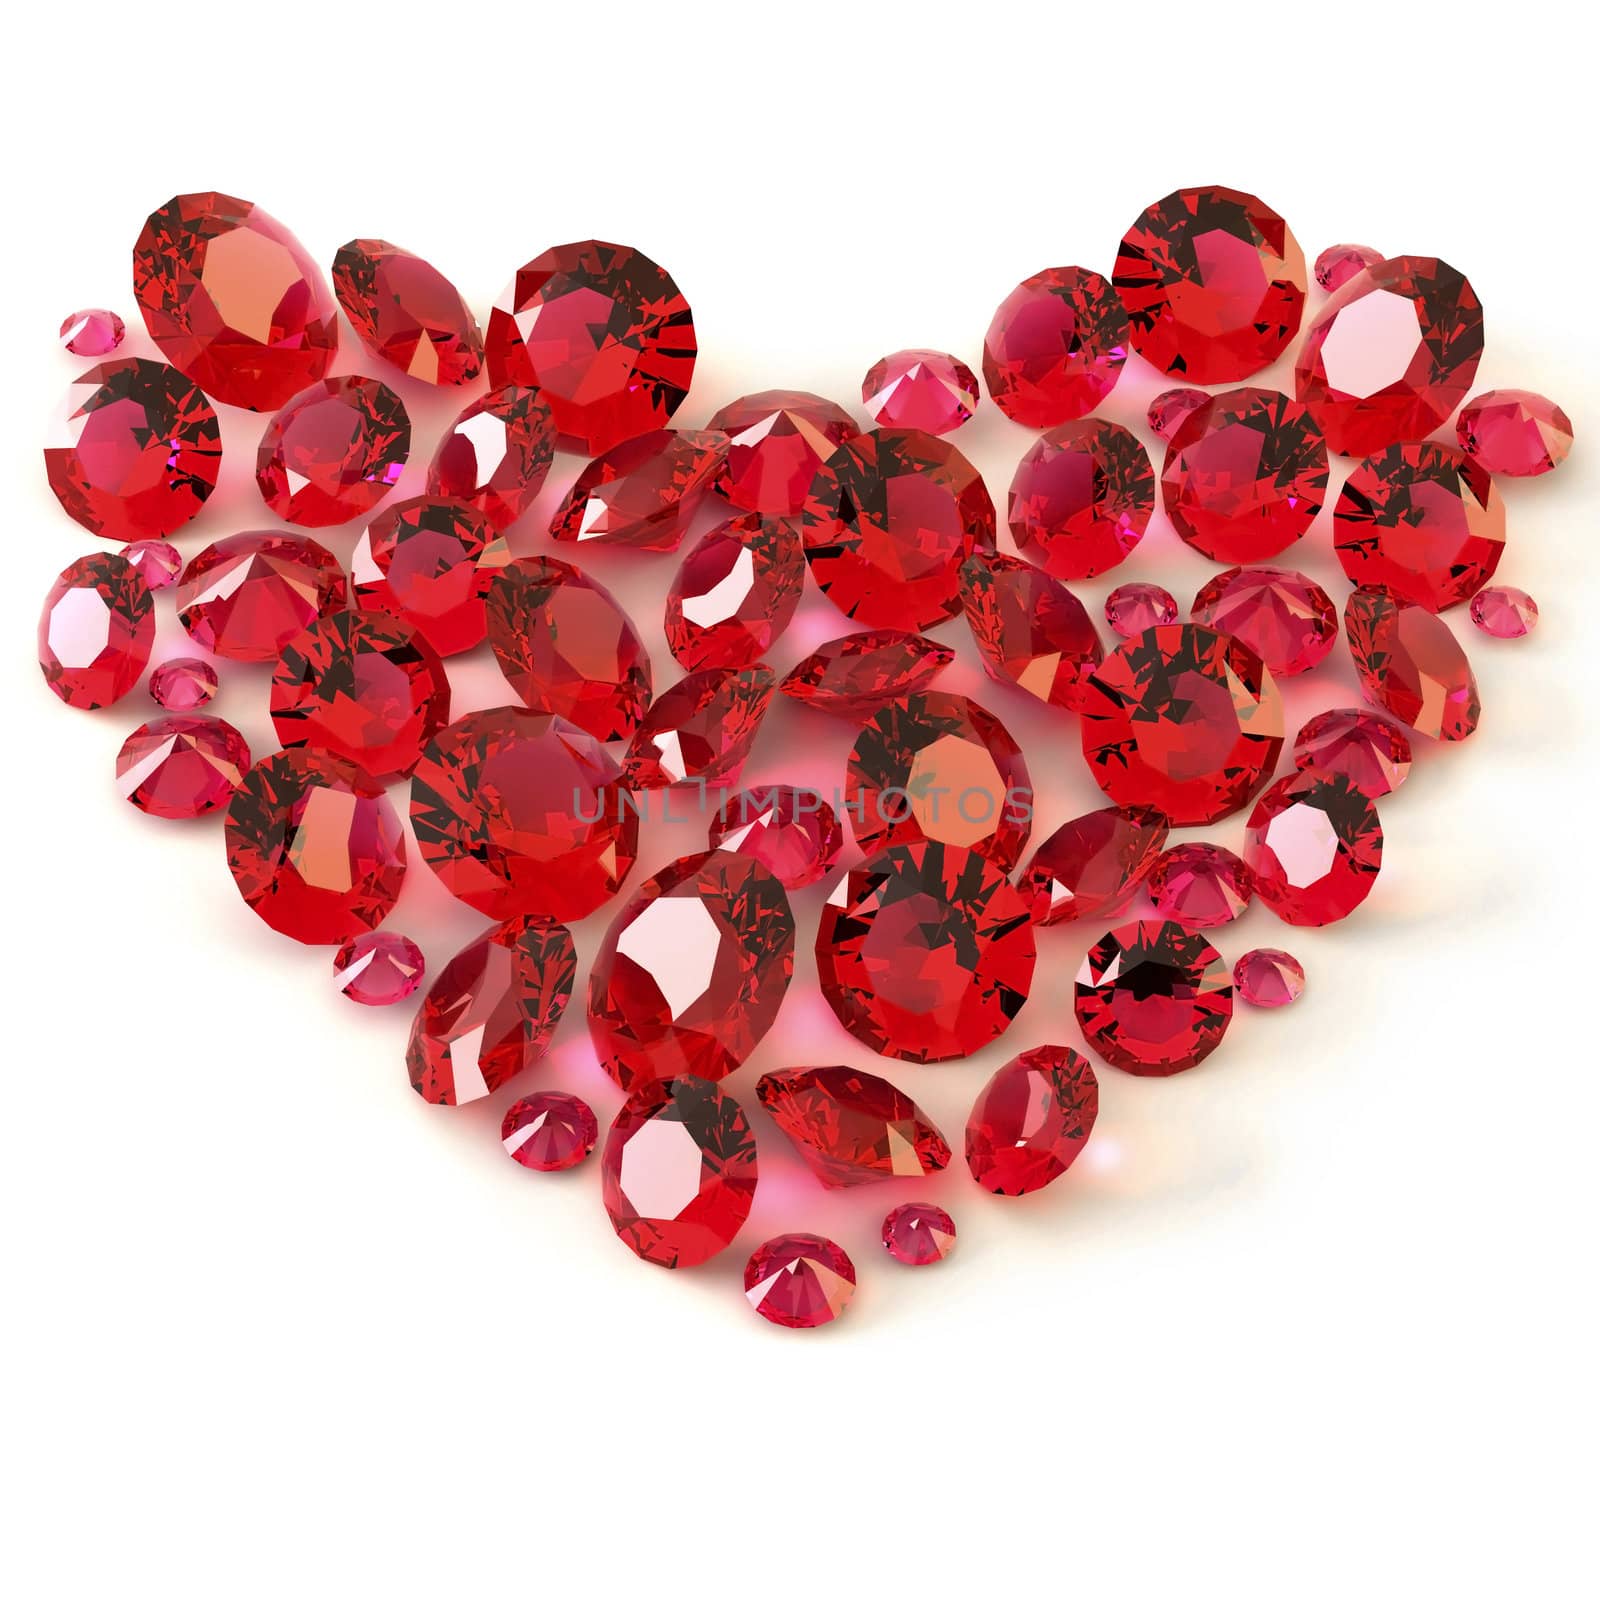 Heart of rubies on white background